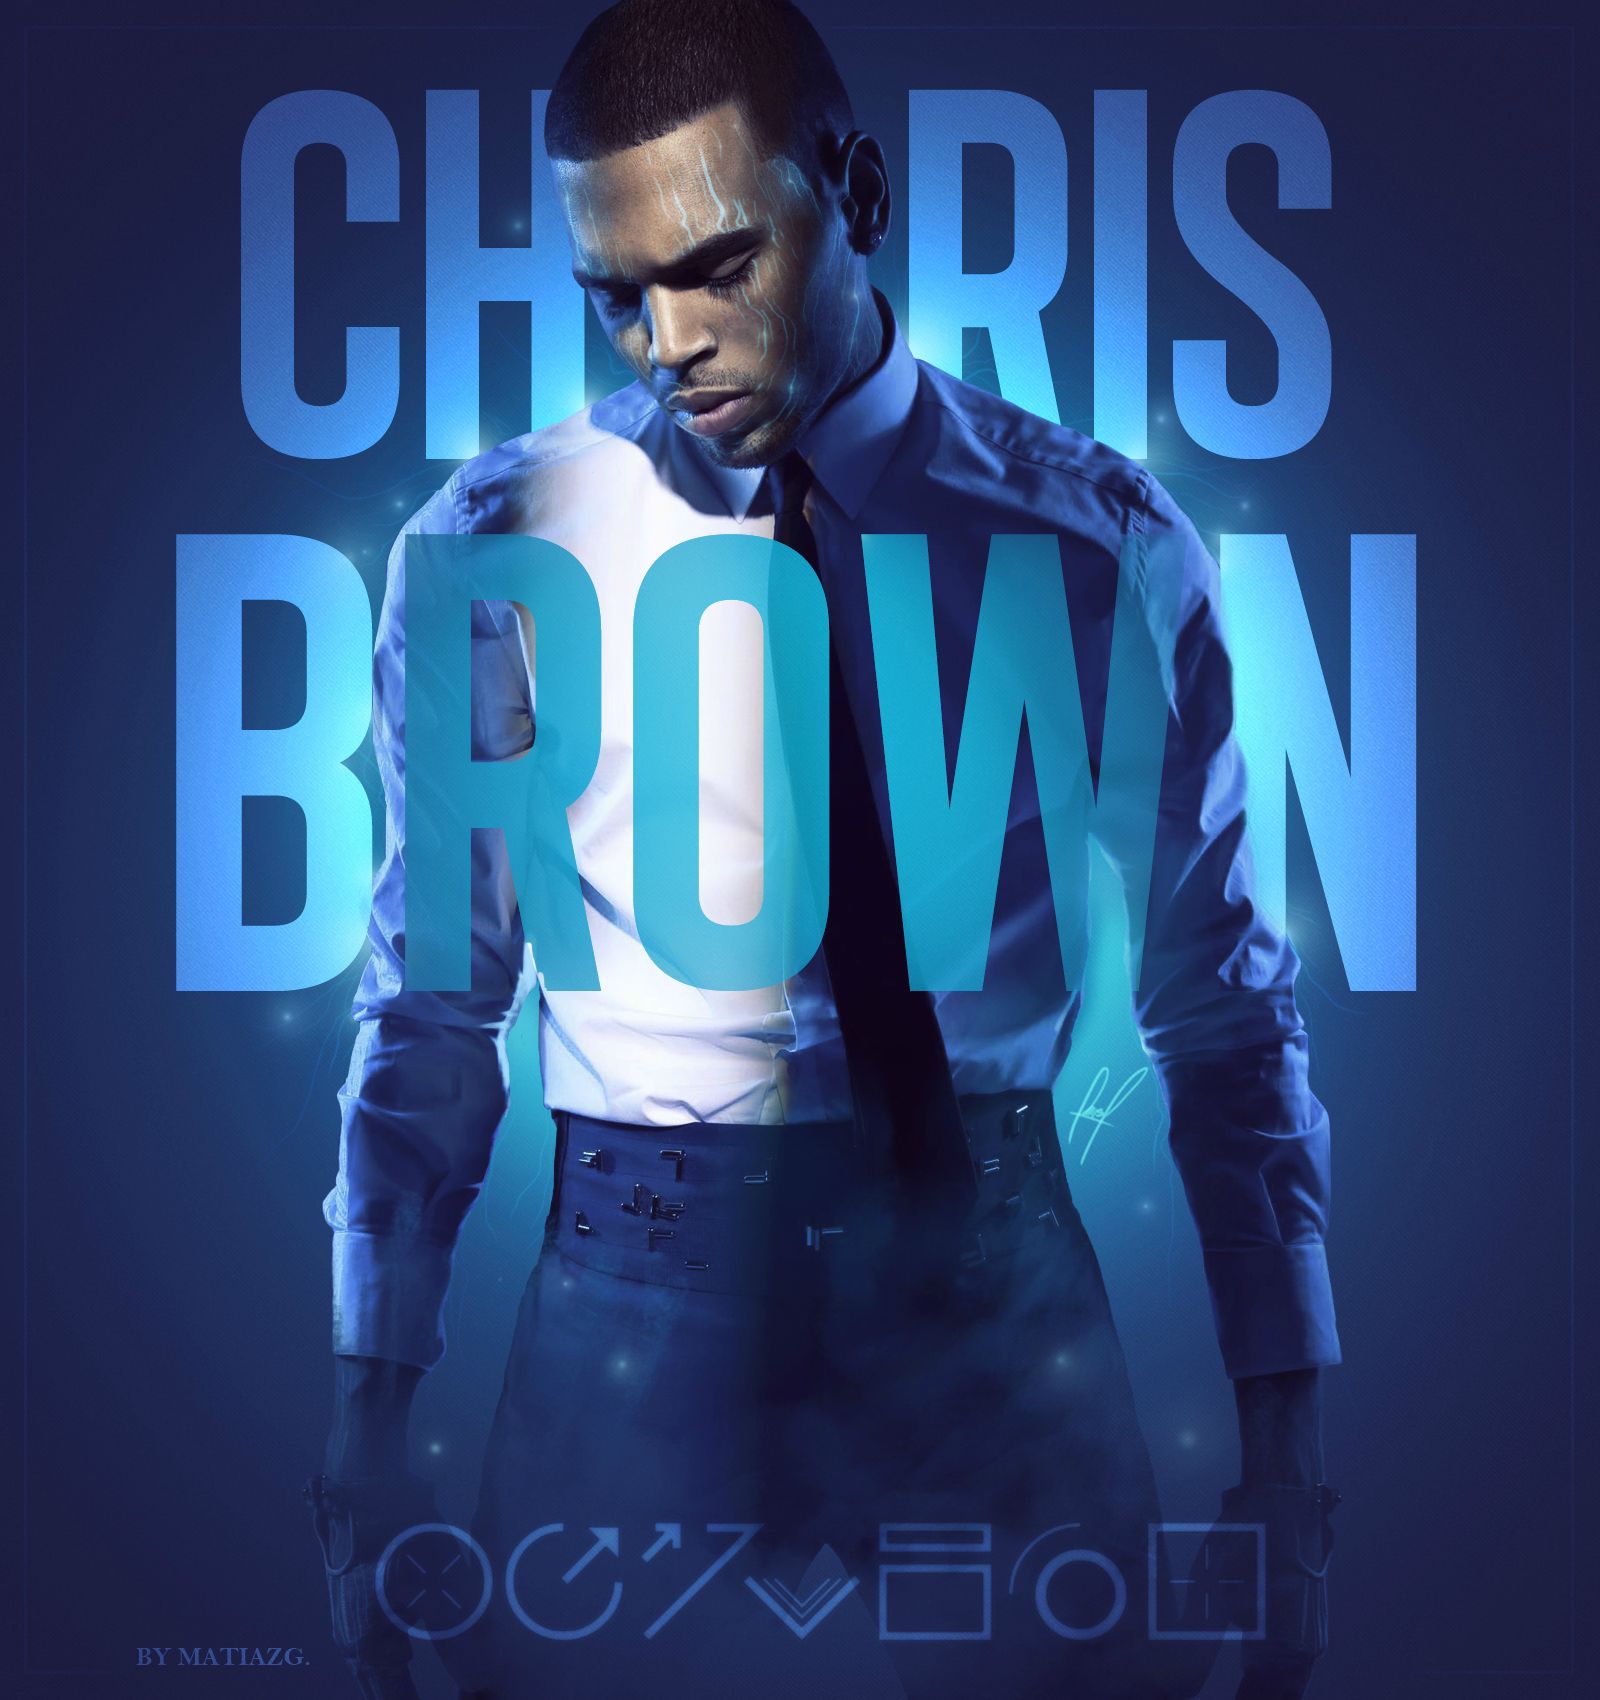 Chris Brown Fortune Wallpaper By Matiazgdesign